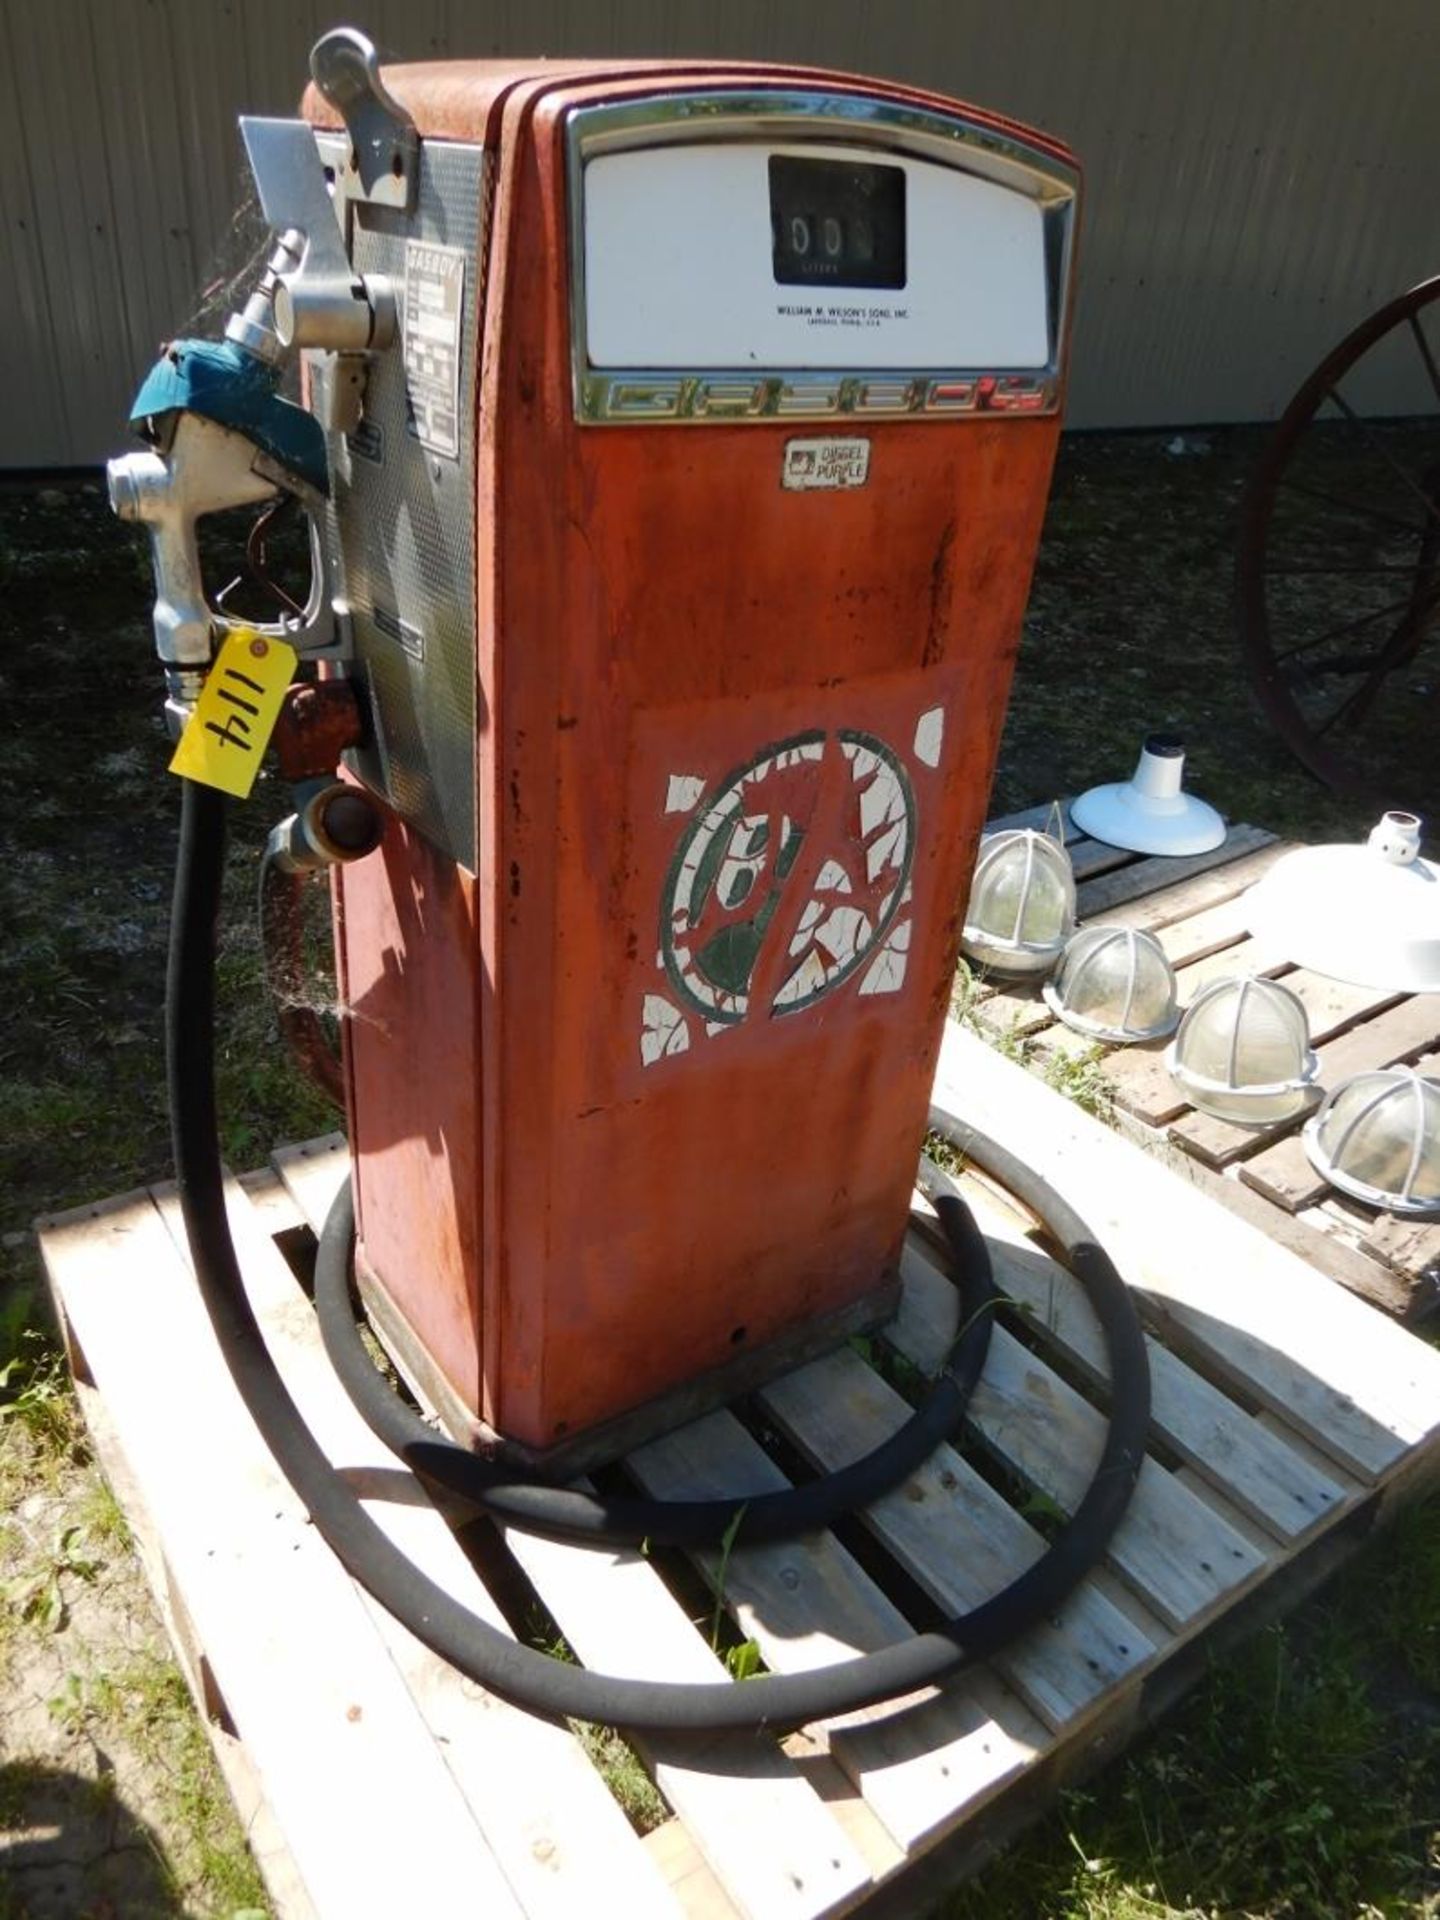 VINTAGE GAS BOY #53 GAS STATION FUEL PUMP S/N 1221 (SAID TO BE WORKING GOOD)